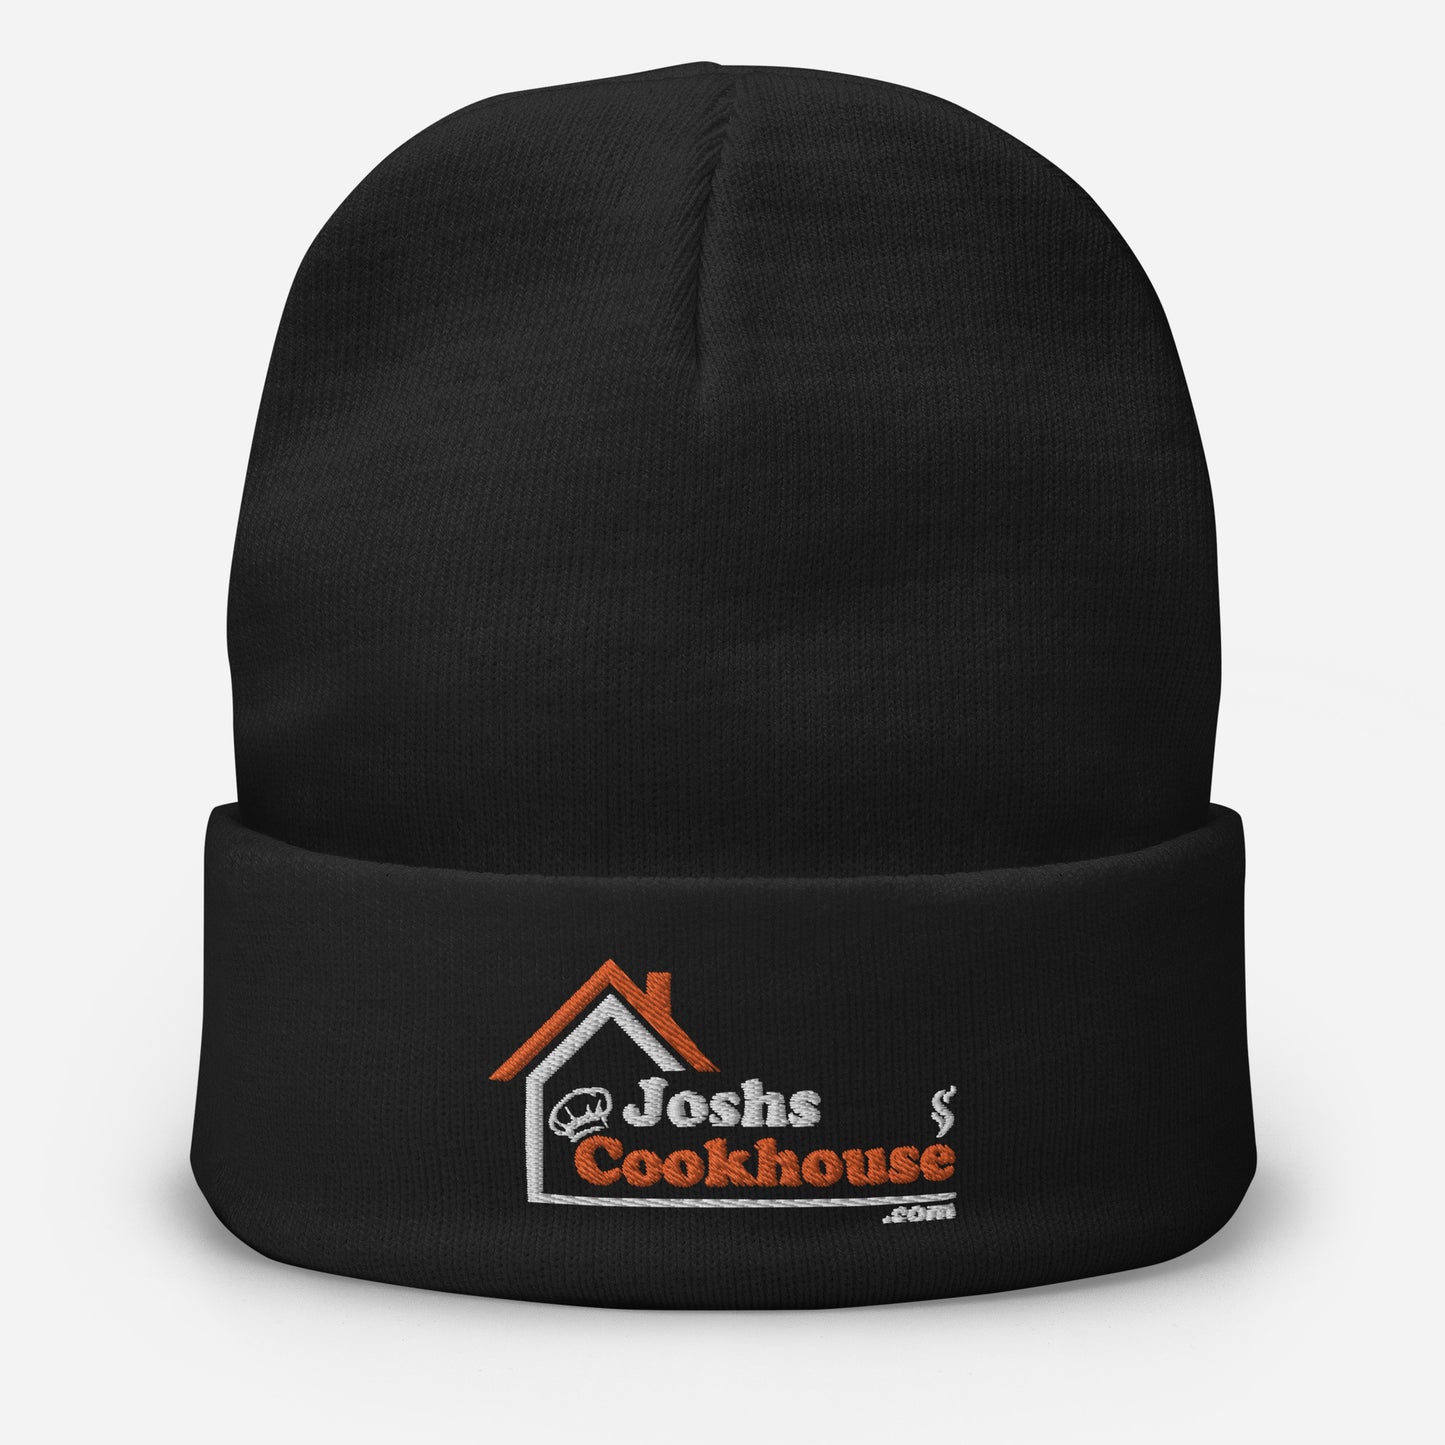 Joshs Cookhouse Embroidered Beanie